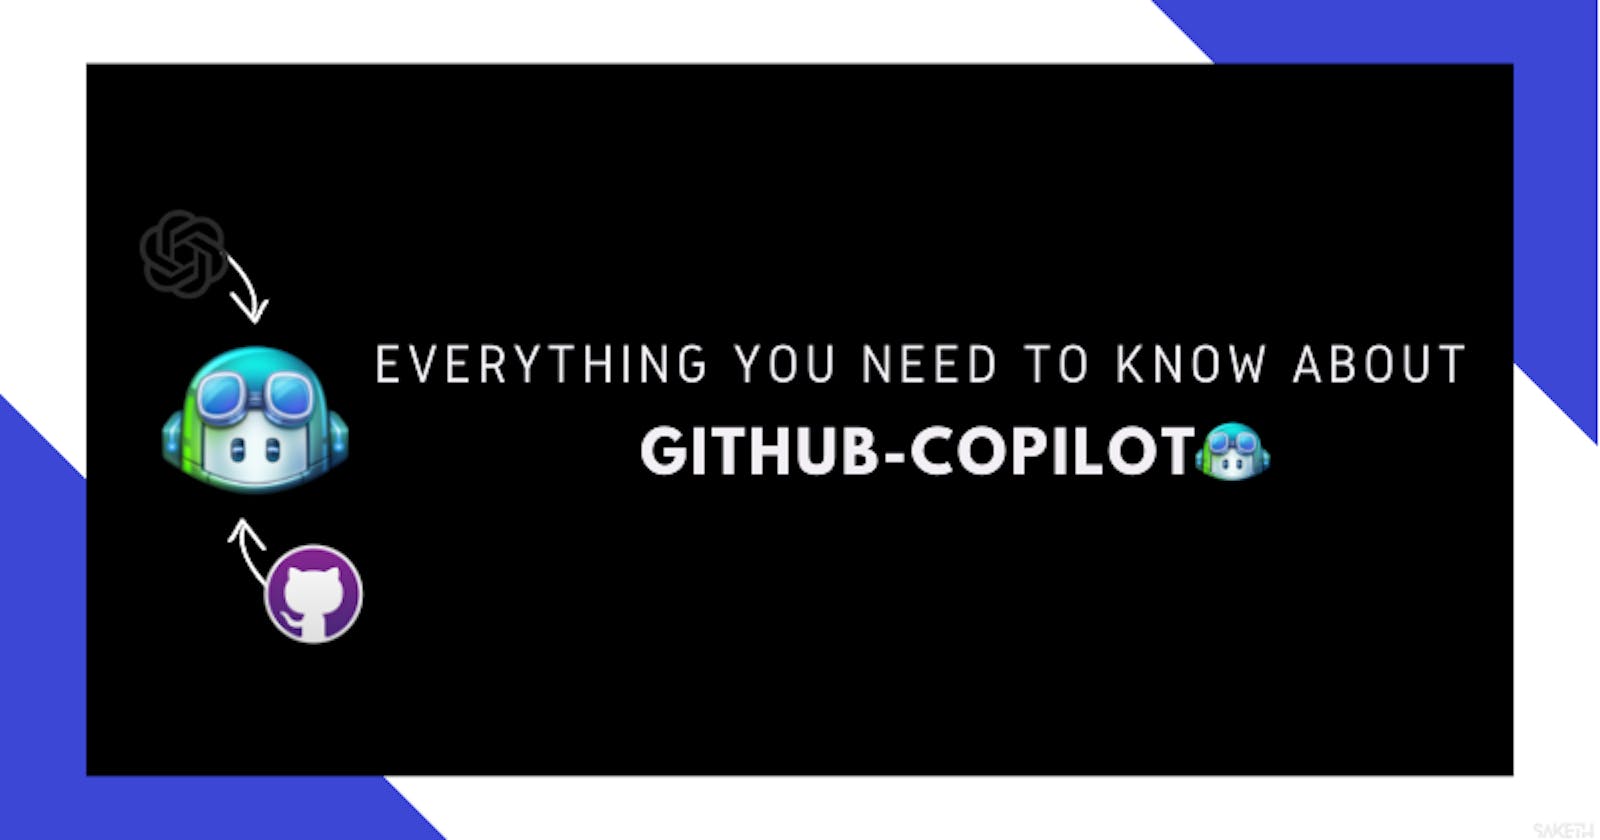 Everything You Need To Know About Github-Copilot